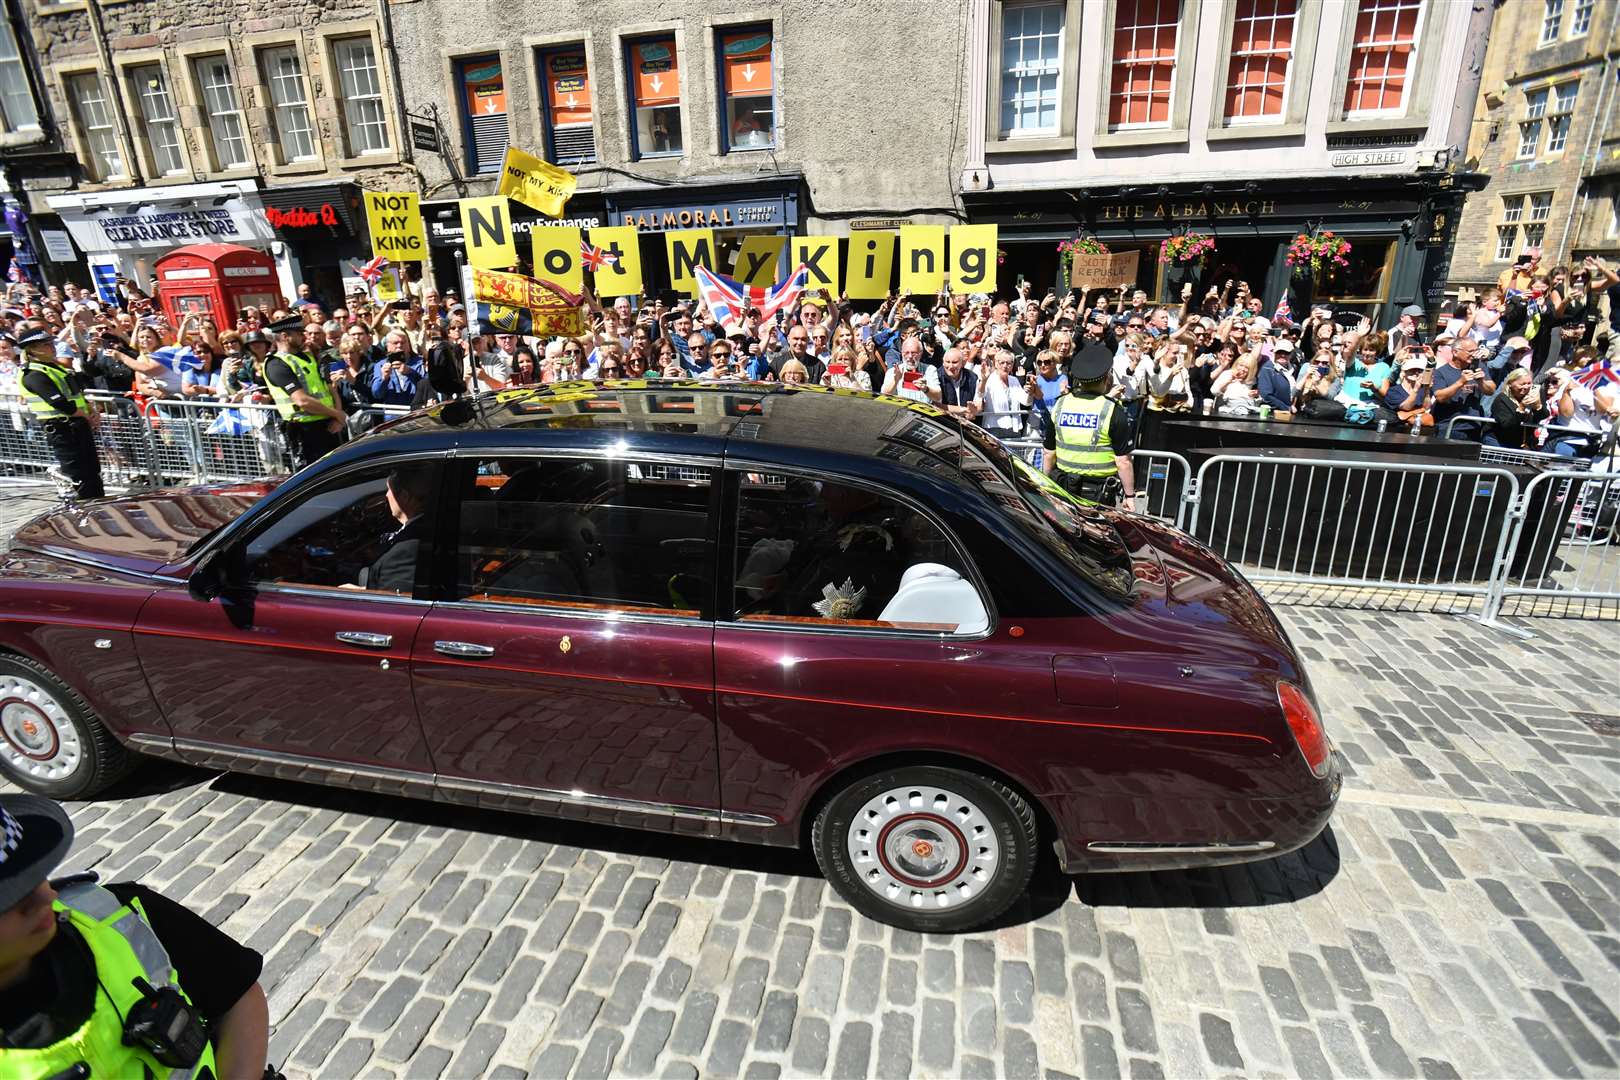 Protesters held banners saying ‘Not My King’ as the procession made its way up the Royal Mile (Mark Runnacles/PA)